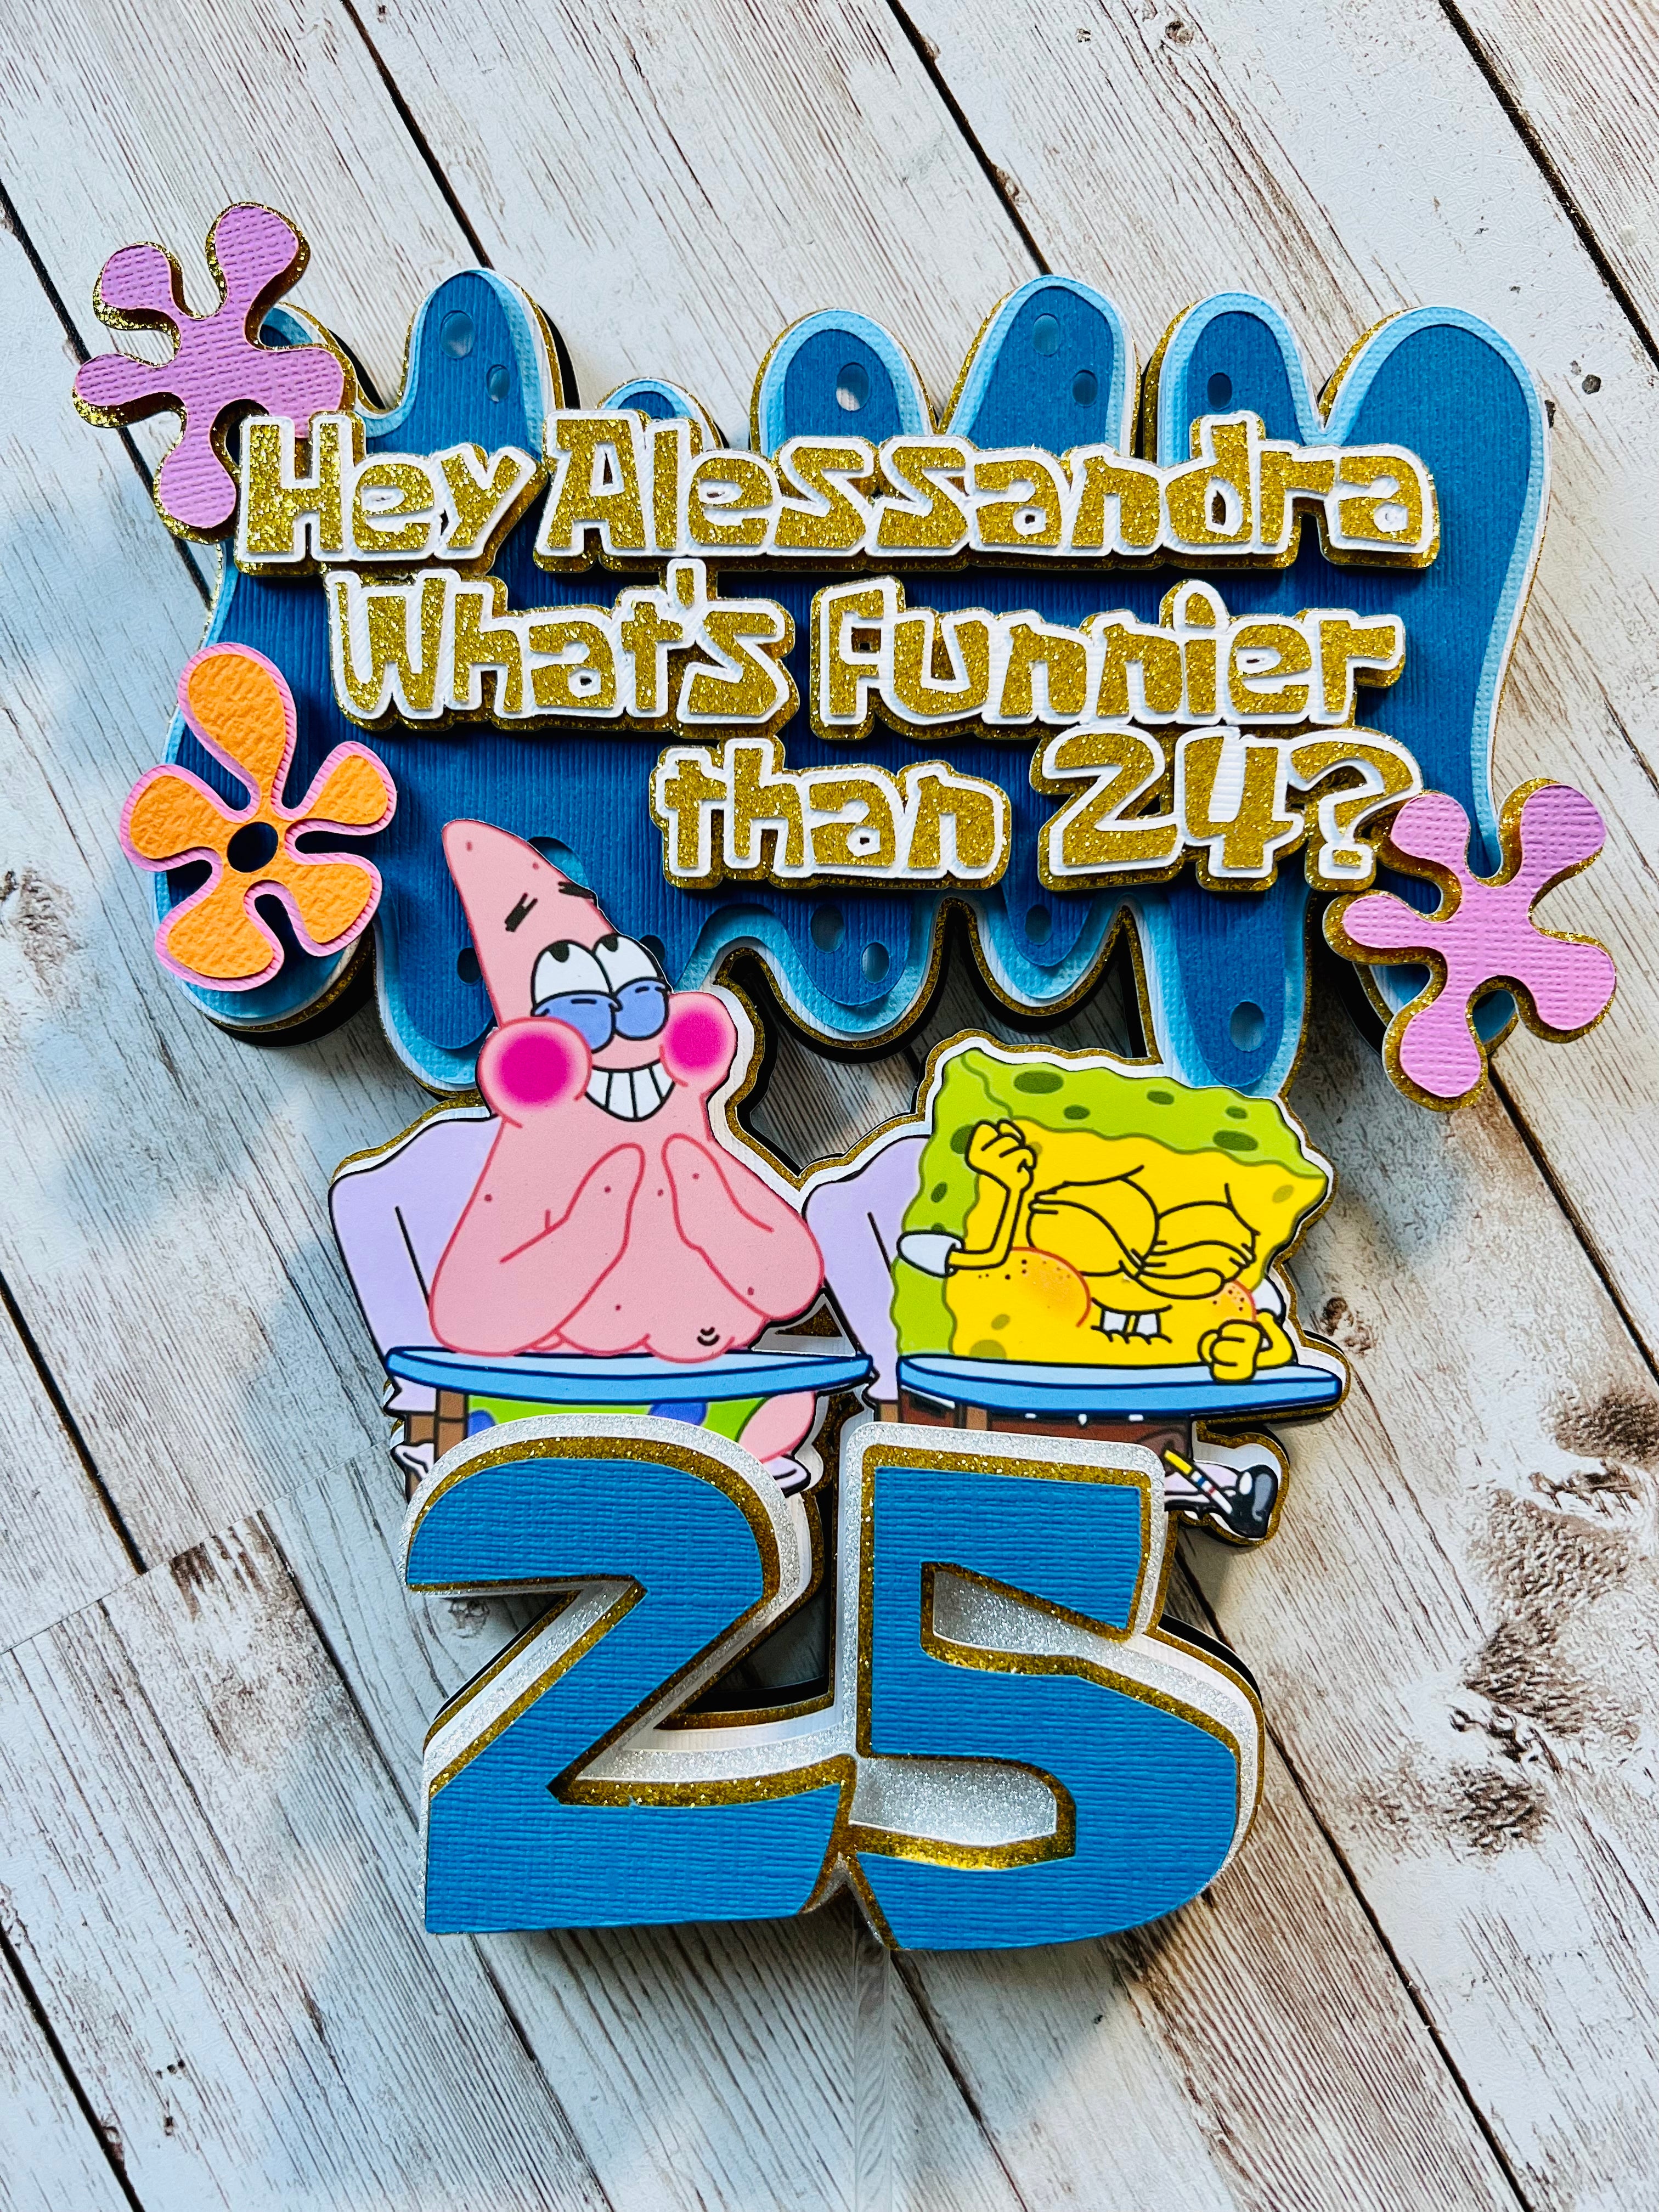 Whats Funnier Than 24 25 spongebob 25 Personalize Cake - Etsy